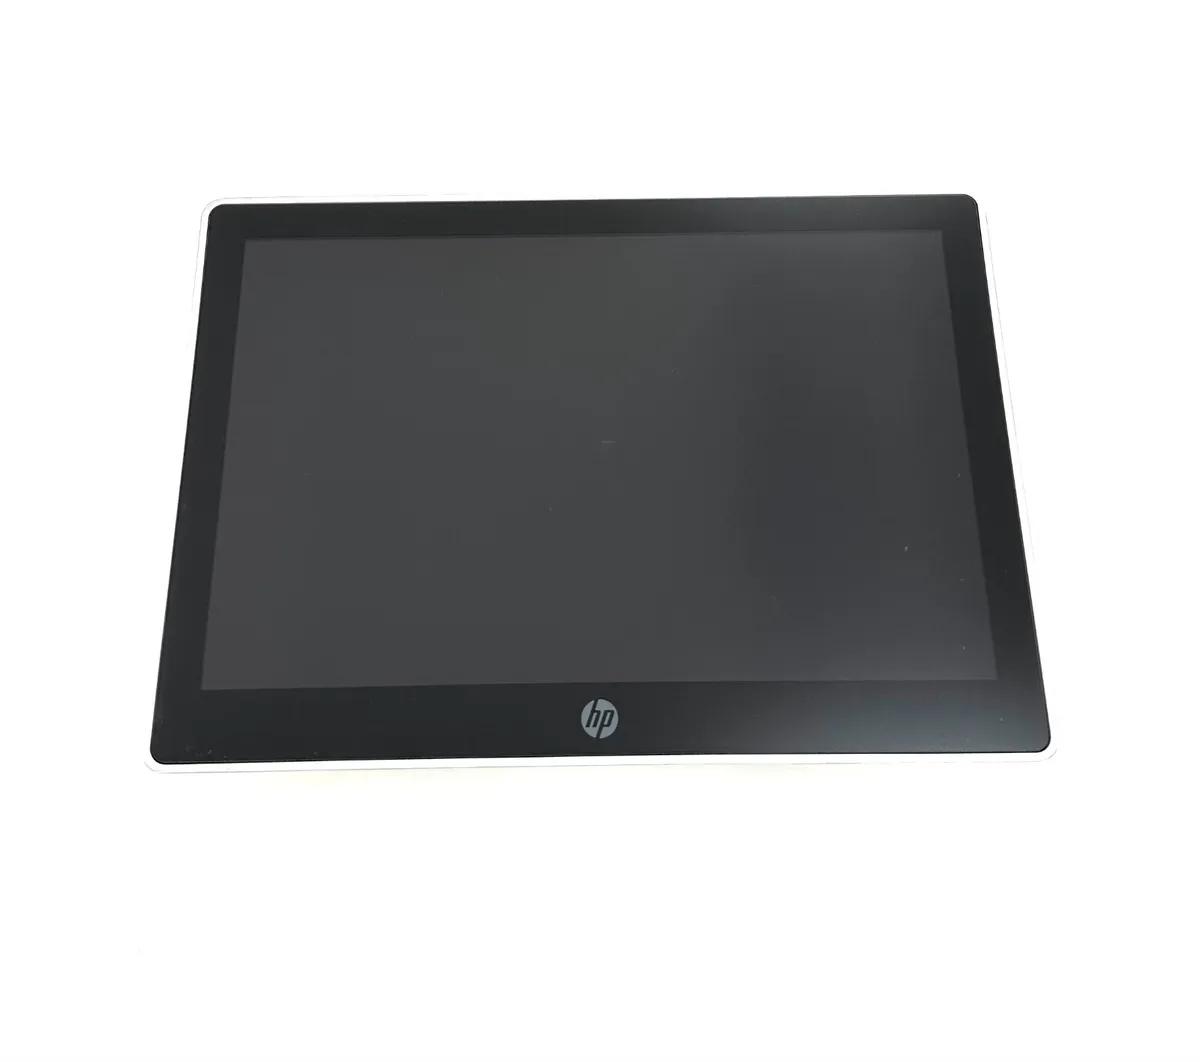 L7014t 14-inch Retail Touch Monitor